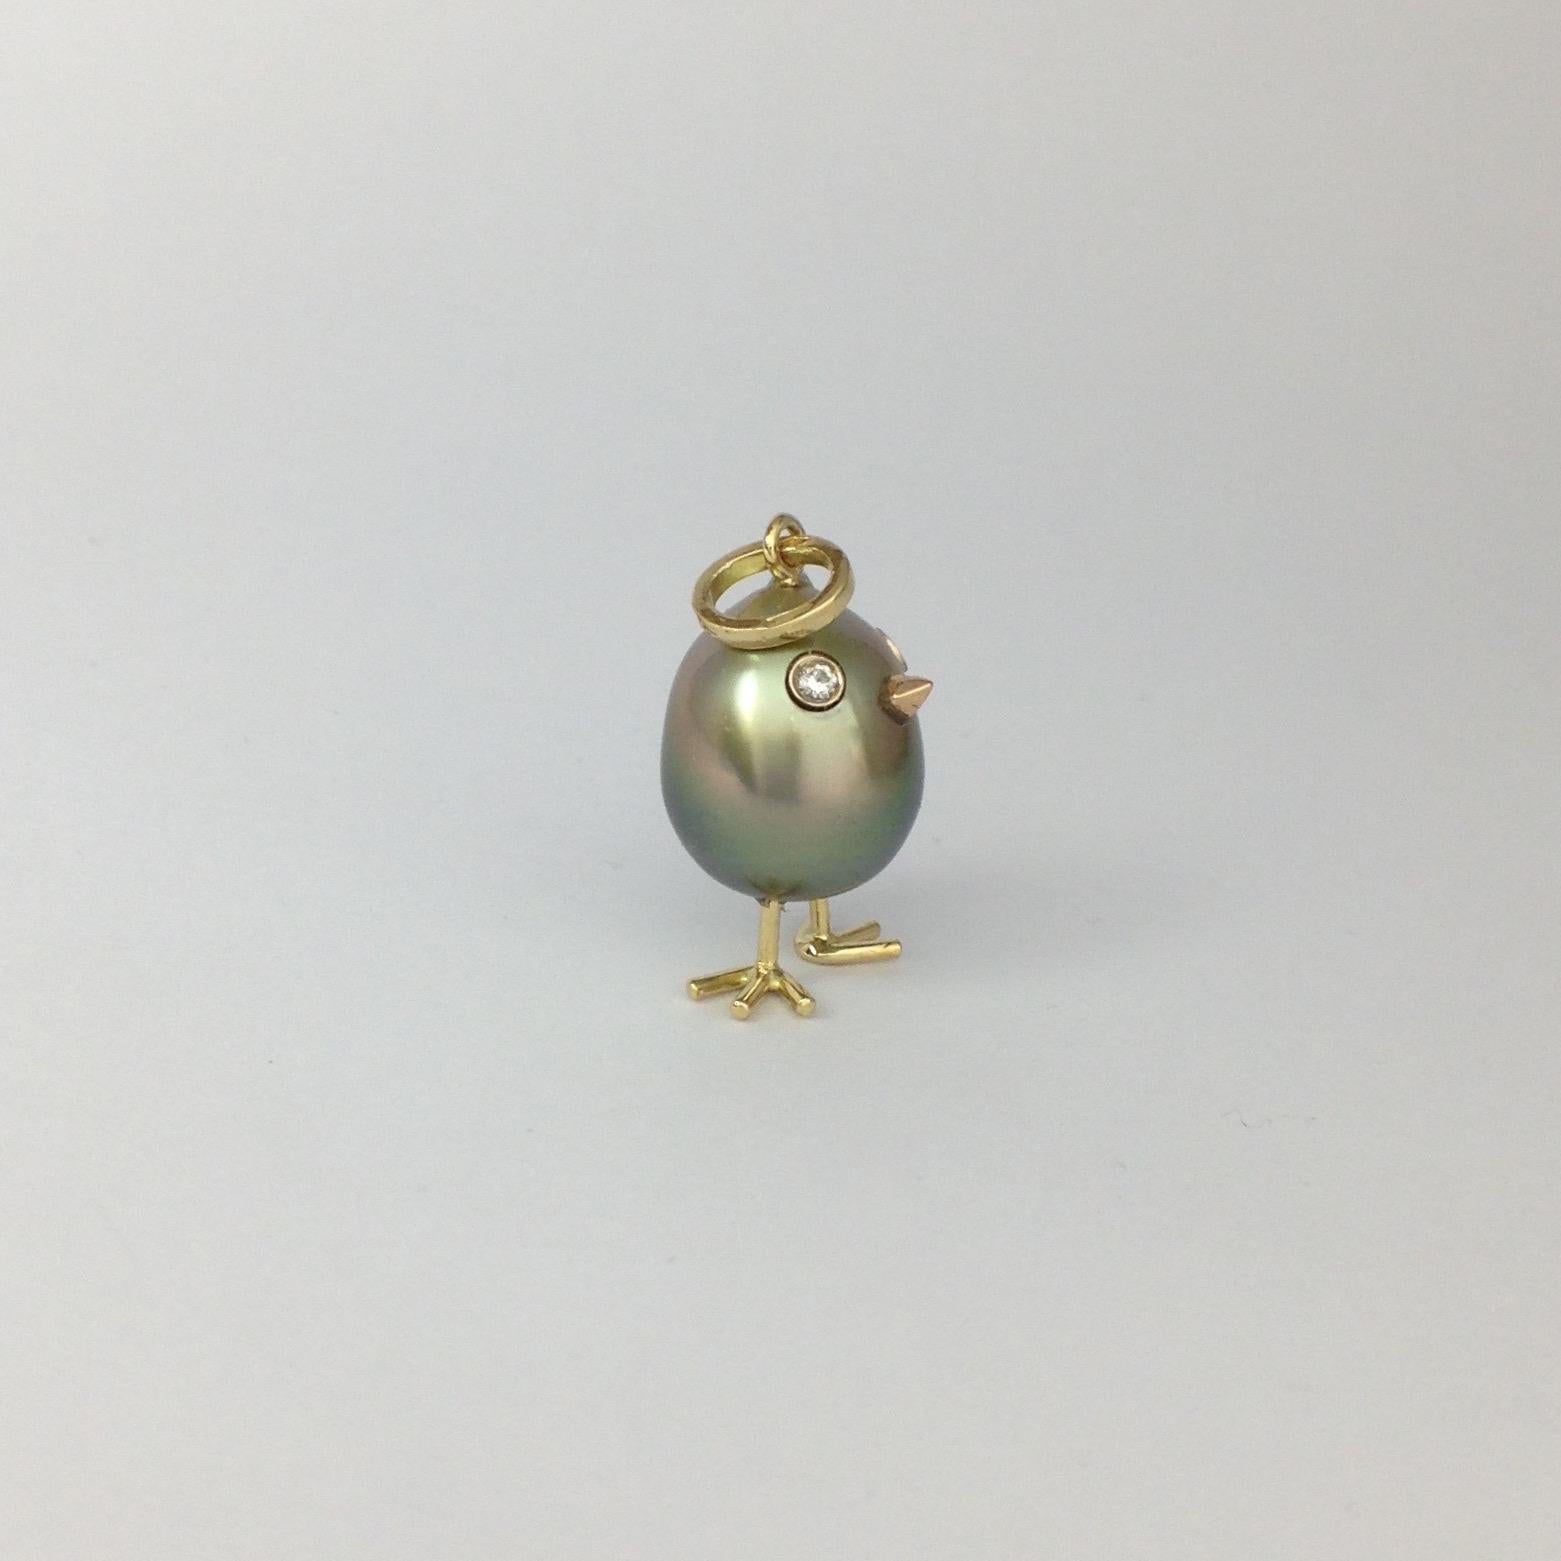 A beautiful Tahitian pearl has been carefully crafted to make a chick. He has his two legs, two eyes encrusted with two brown diamonds and his beak. 
The gold is white for the eyes, the beak is red and the other particulars are in yellow gold.
The